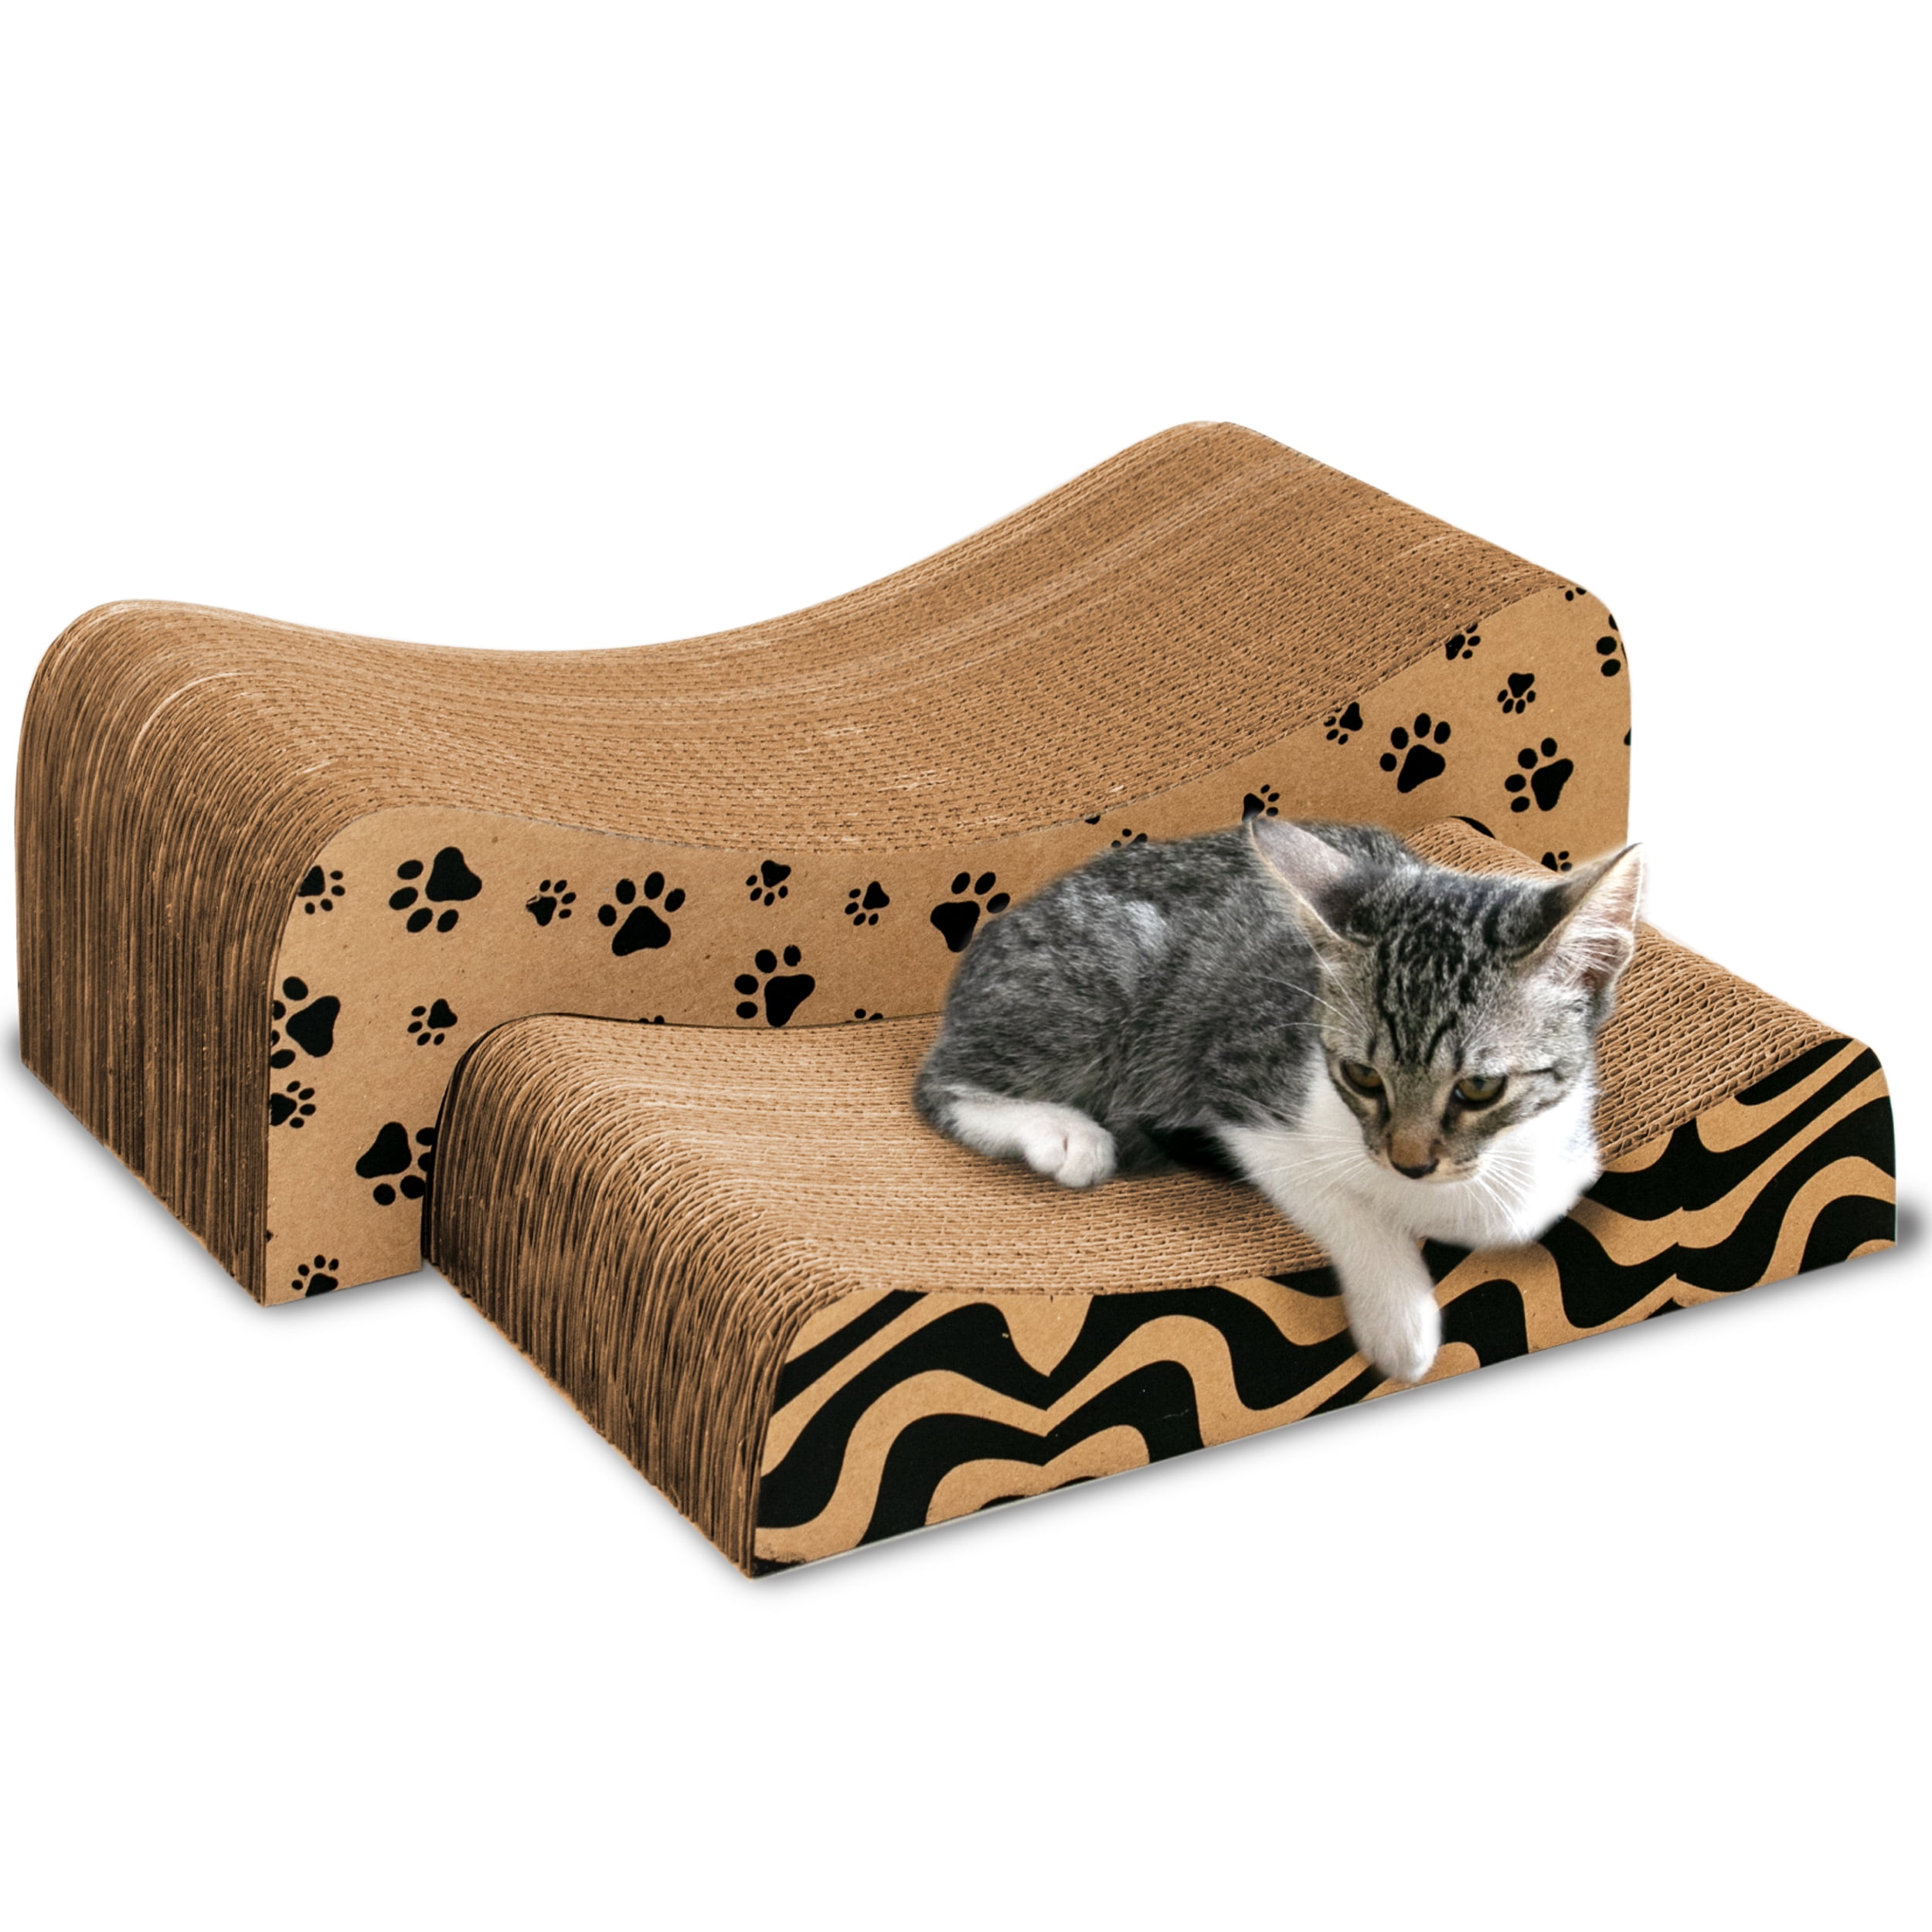 Cardboard Cat Scratcher with Solid Wood Frame are More Durable 5 in 1 Cat Scratchers for Indoor Cats of Small Medium Size. Reversible Cat Furniture Cat Scratcher 